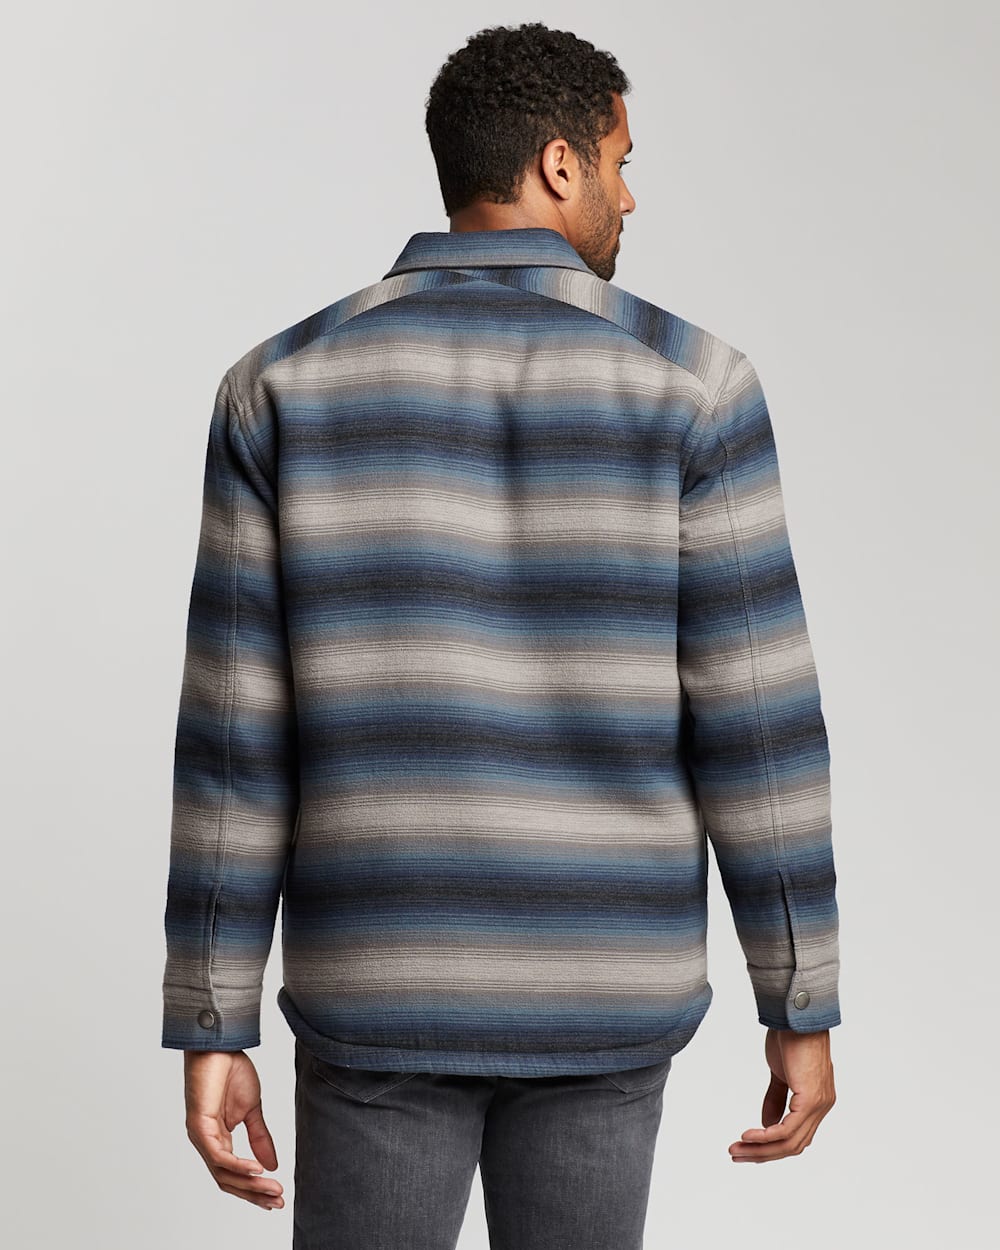 ALTERNATE VIEW OF MEN'S STRIPED SHERPA-LINED SHIRT JACKET IN BLACK/BLUE/GREY image number 3